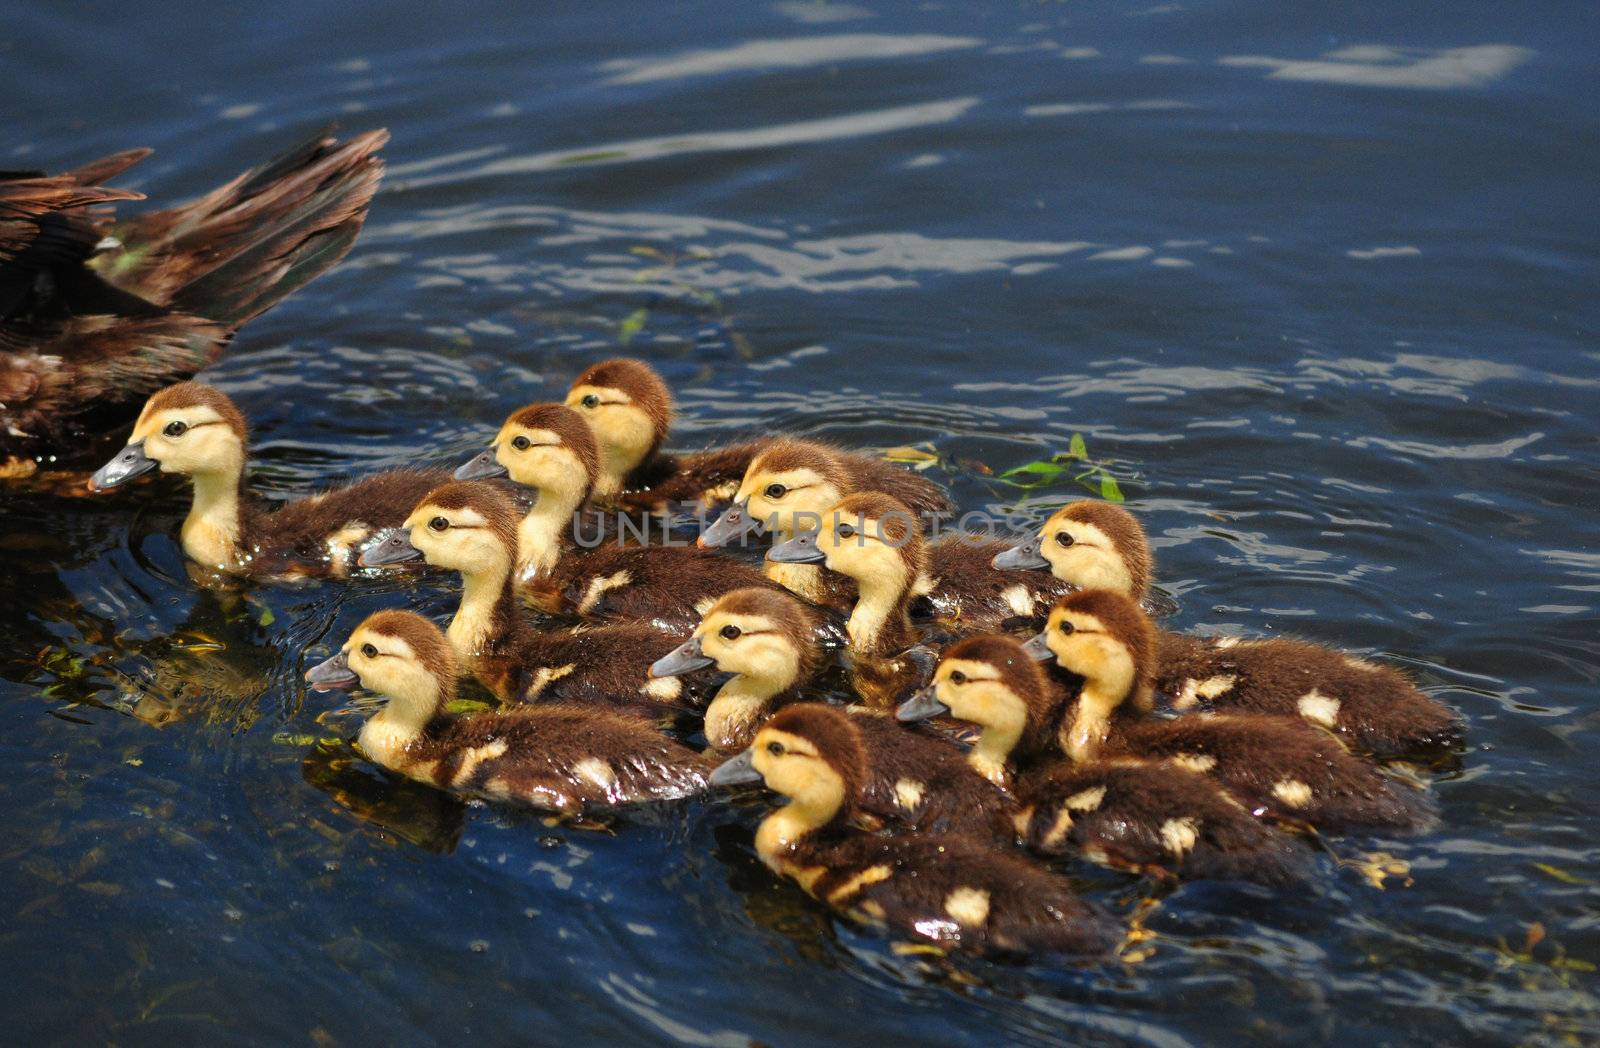 Mother and cute baby ducks by ftlaudgirl